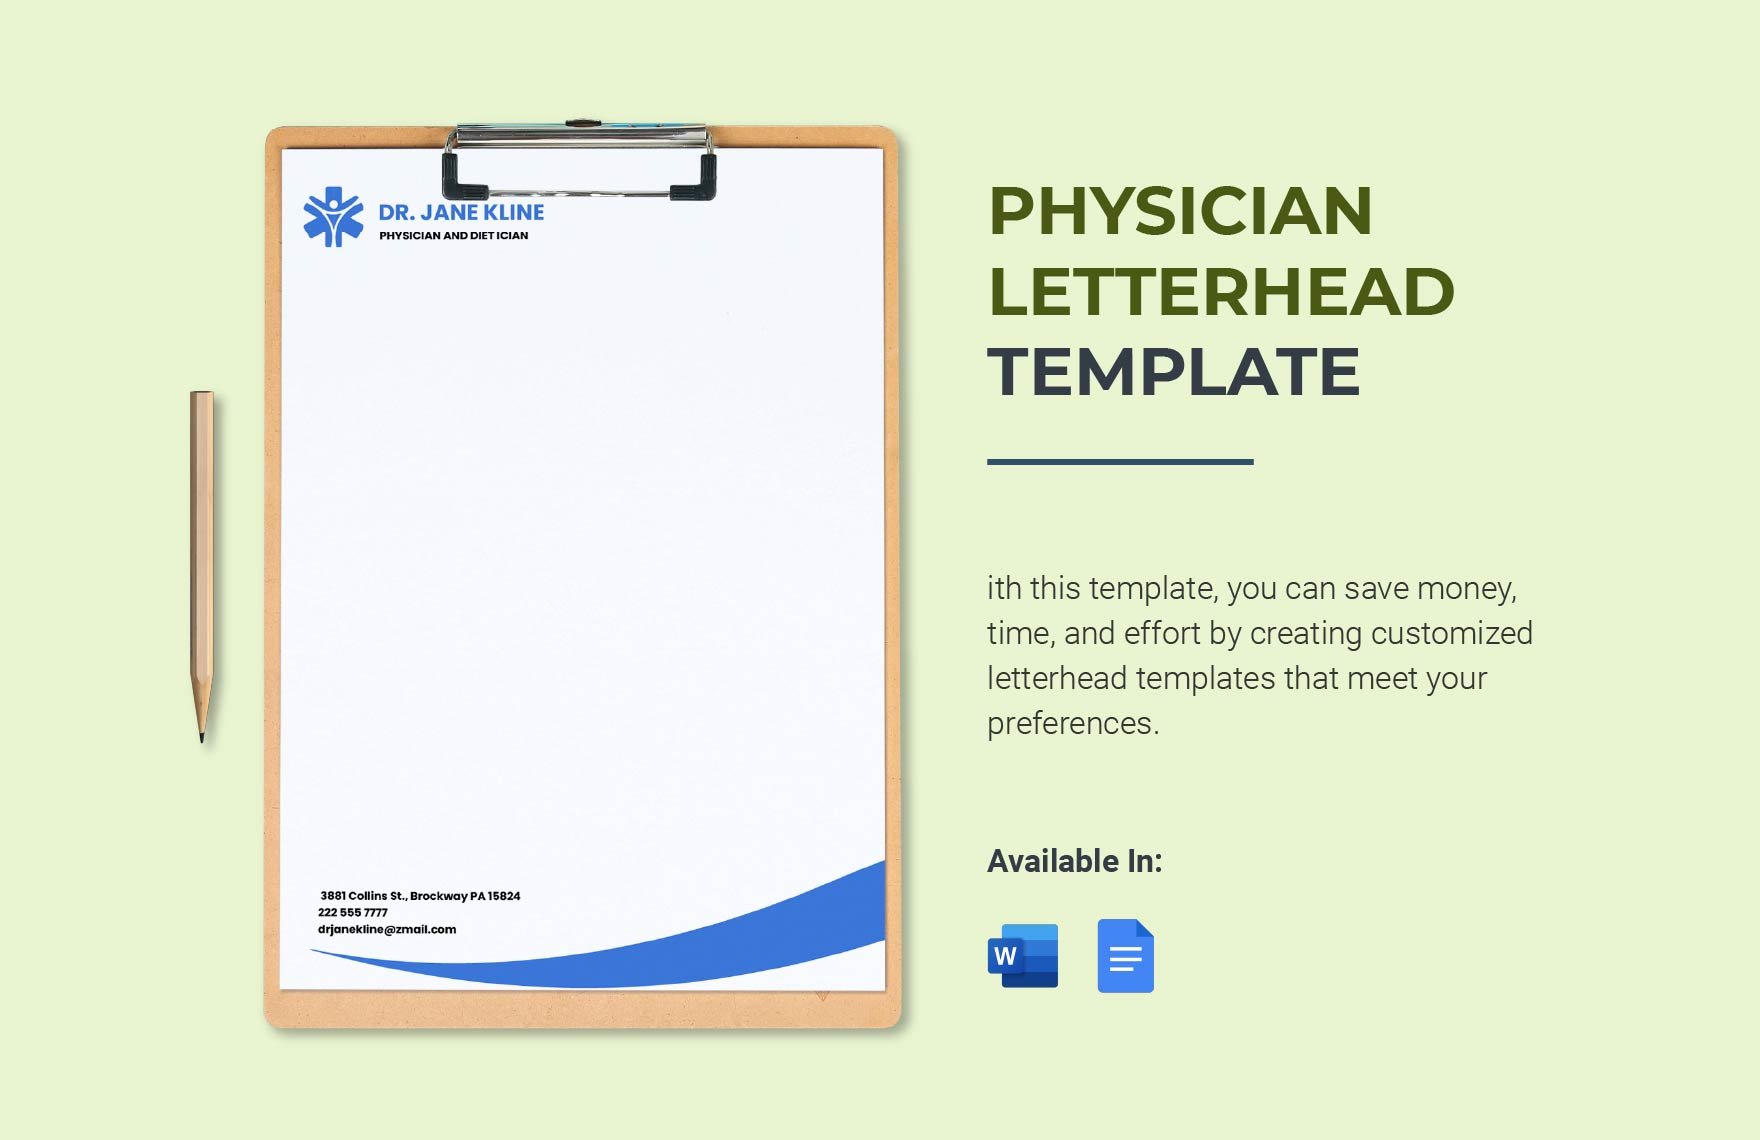 Physician Letterhead Template in Word, Google Docs